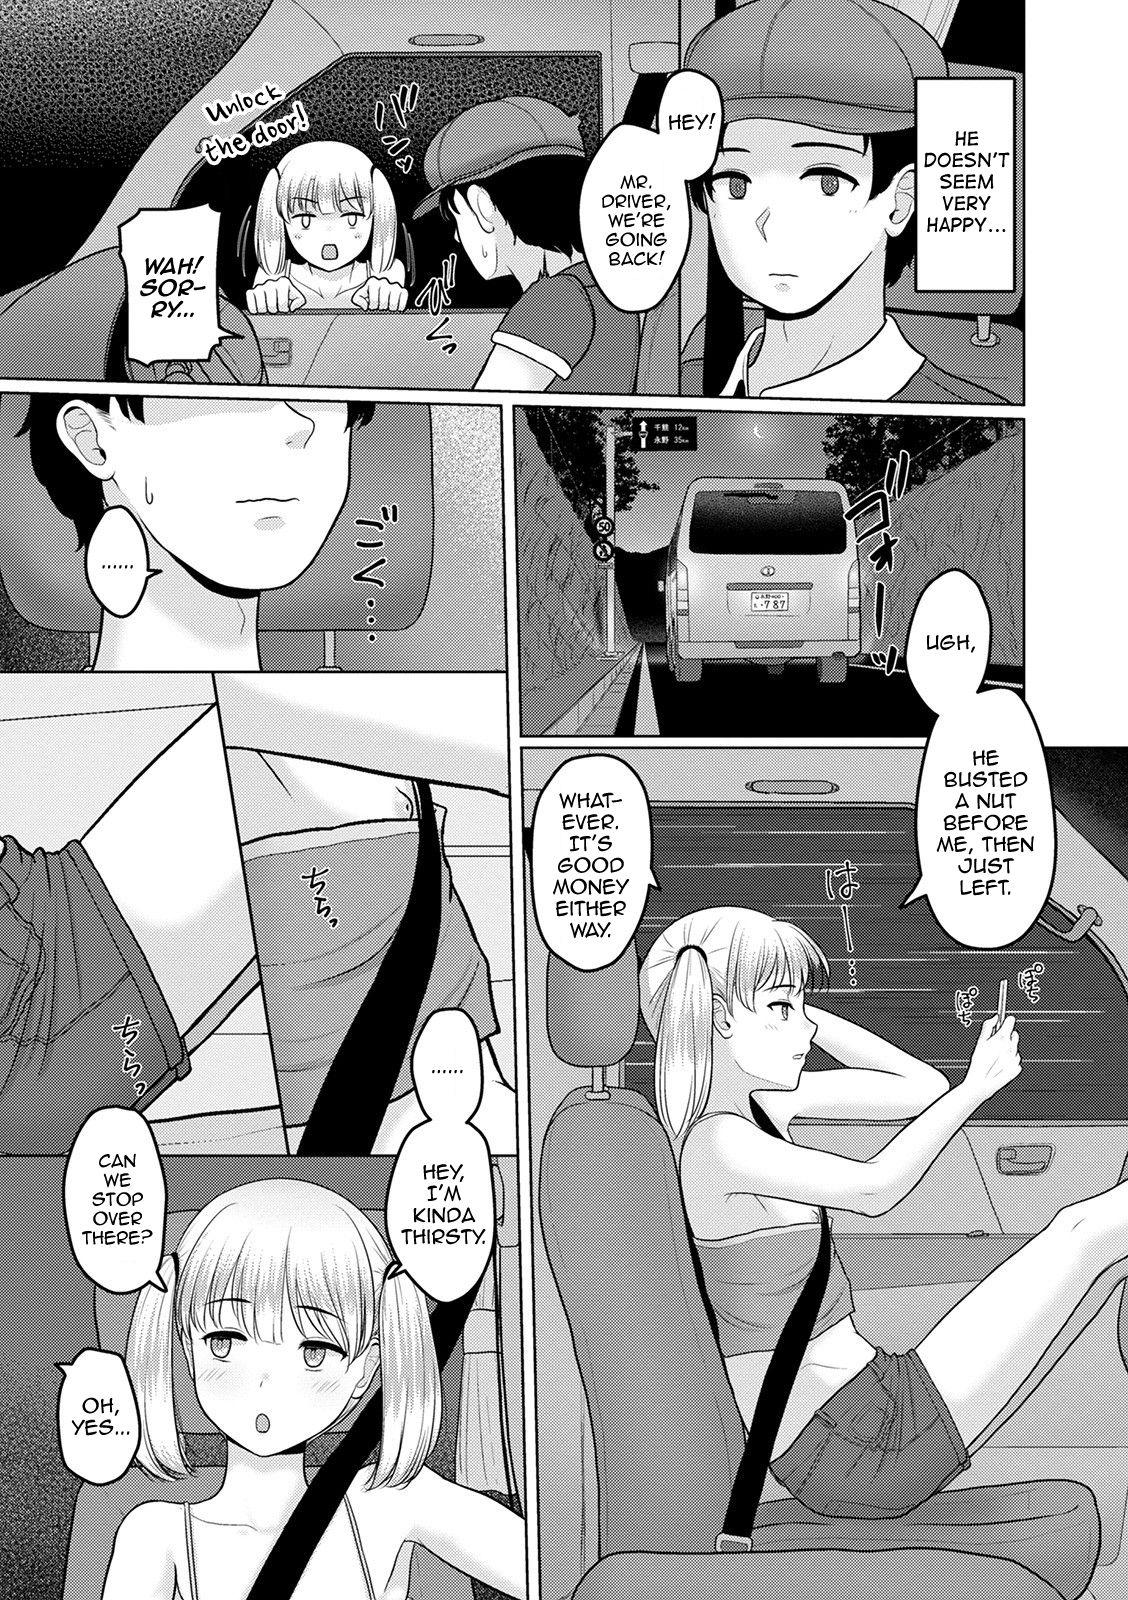 Leaked Satisfaction! Cunnilingus - Page 5